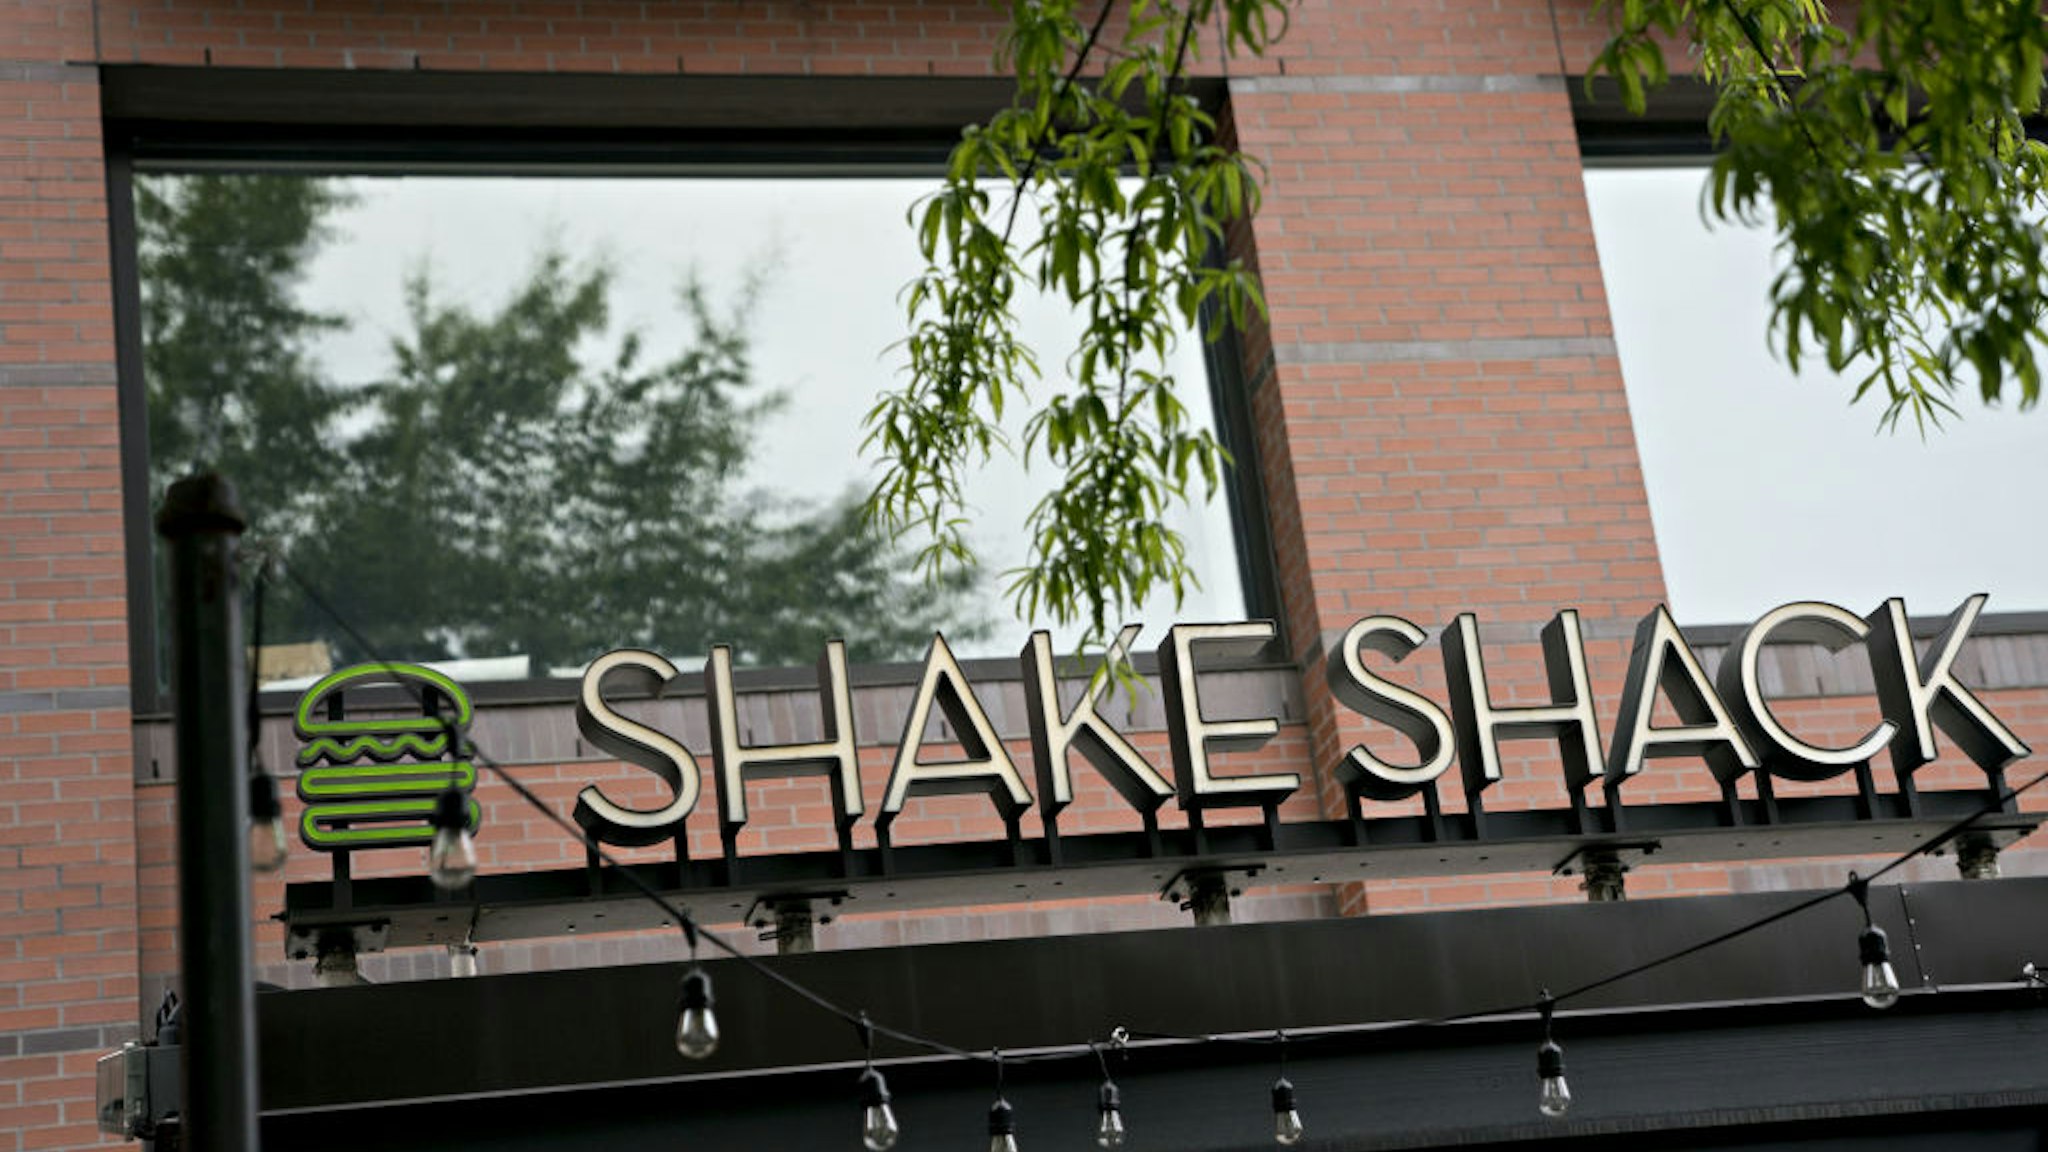 Signage stands at a Shake Shack restaurant in Washington, D.C., U.S., on Monday, April 20, 2020. Shake Shack Inc. will return a $10 million loan from the U.S. government amid criticism that the publicly traded burger chain and other larger companies gobbled up the emergency funding while smaller businesses were frozen out. Photographer: Andrew Harrer/Bloomberg via Getty Images